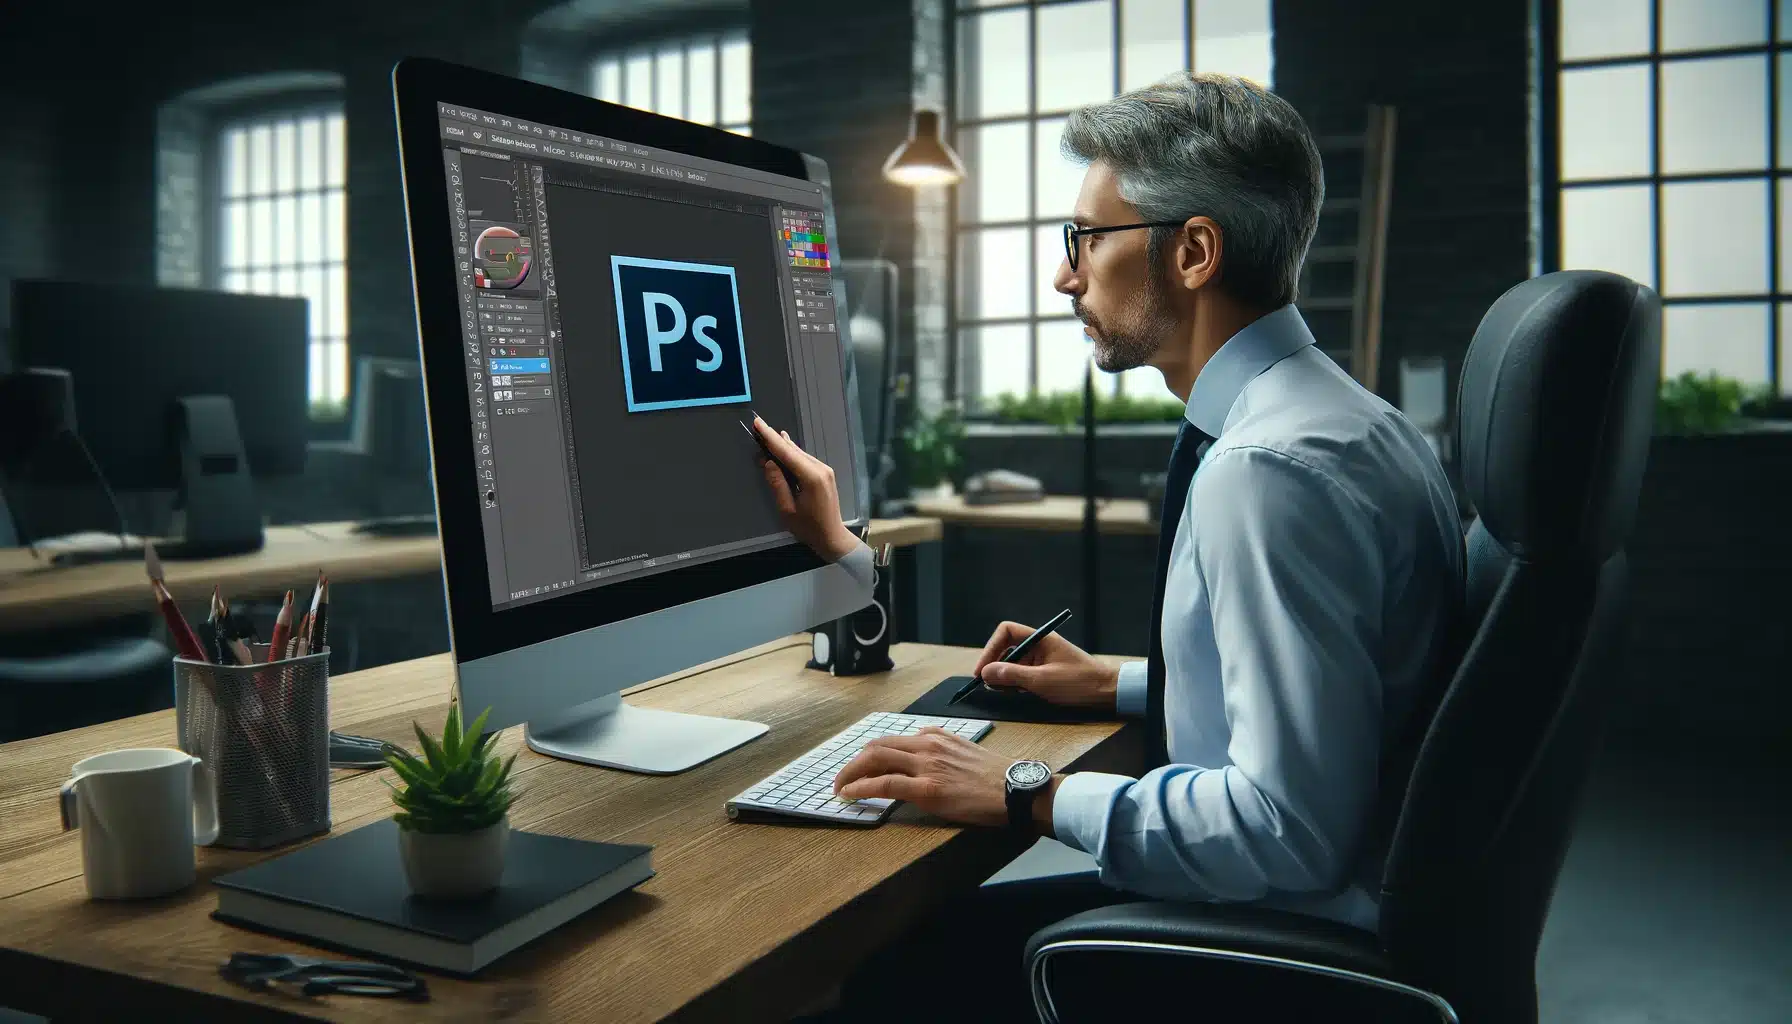 Middle-aged male professional using PS to refine a Portrait on a desktop computer in a modern, well-equipped office.